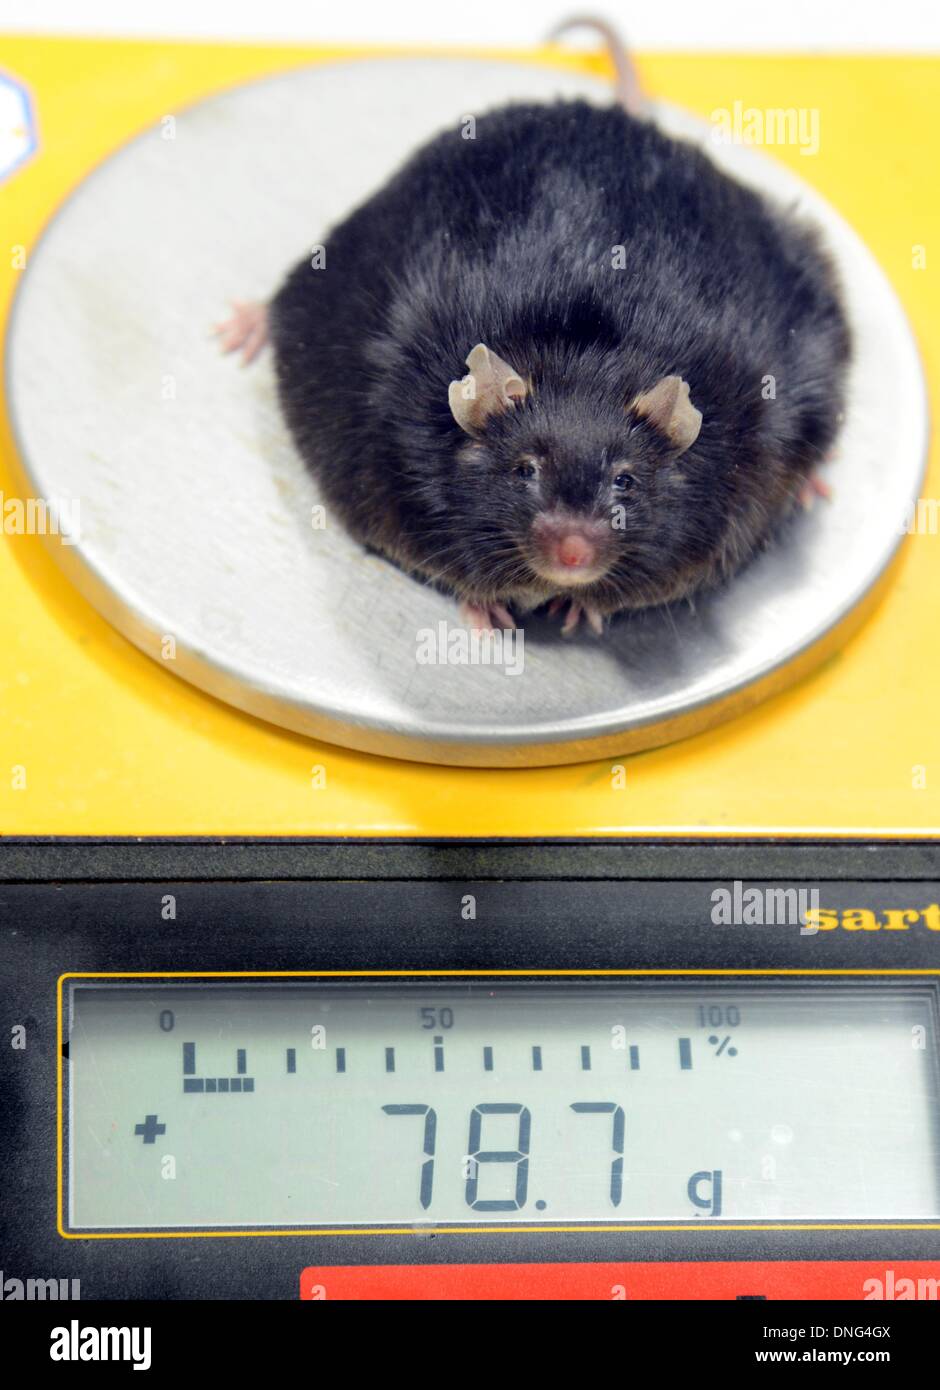 Dr. Nora Kloeting, Director of the junior research group 'Modelltiere der Adiposita' (lit: Model Animals of Obesity), examines the feed intake of a super mouse, who is double the size of his four brothers despite consuming the same amount of food, at the Integrated Research and Treatment Center (IFB) for Obesity Illnesses at the University Hospital in Leipzig, Germany, 19 November 2013. The world's largest fatty tissue bank, around 1,500 samples take from obese patients during operations are stored for scientific investigation. Photo: Waltraud Grubitzsch Stock Photo